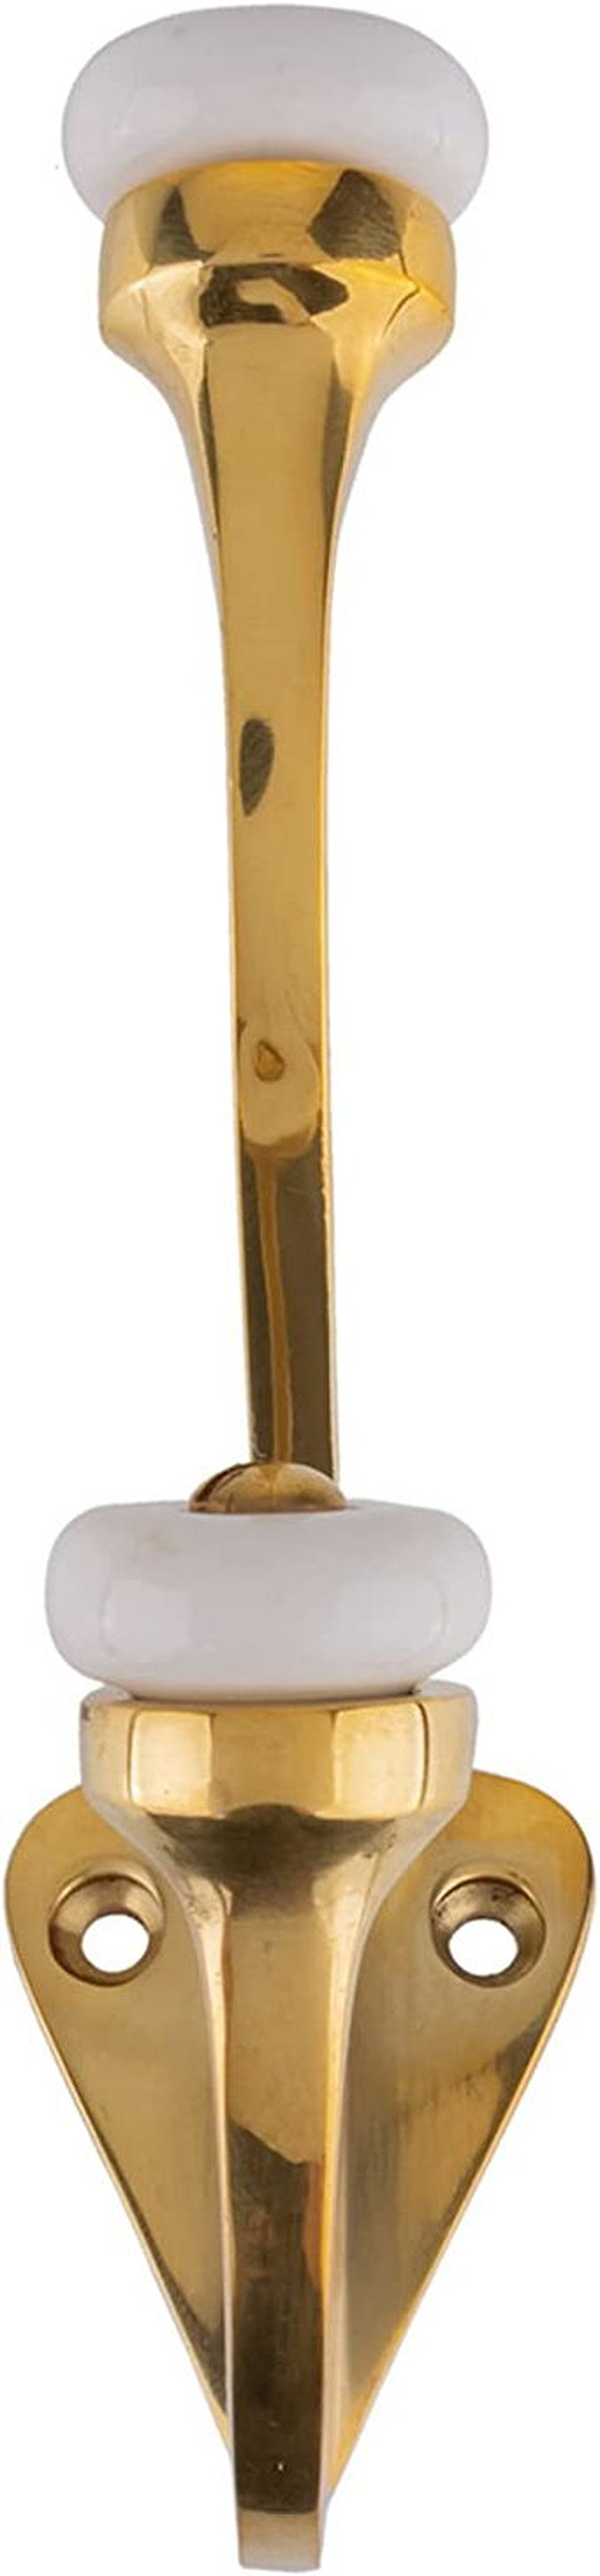 Double Polished Brass with Ceramic Knobs Hat and Coat Hall Tree Hook